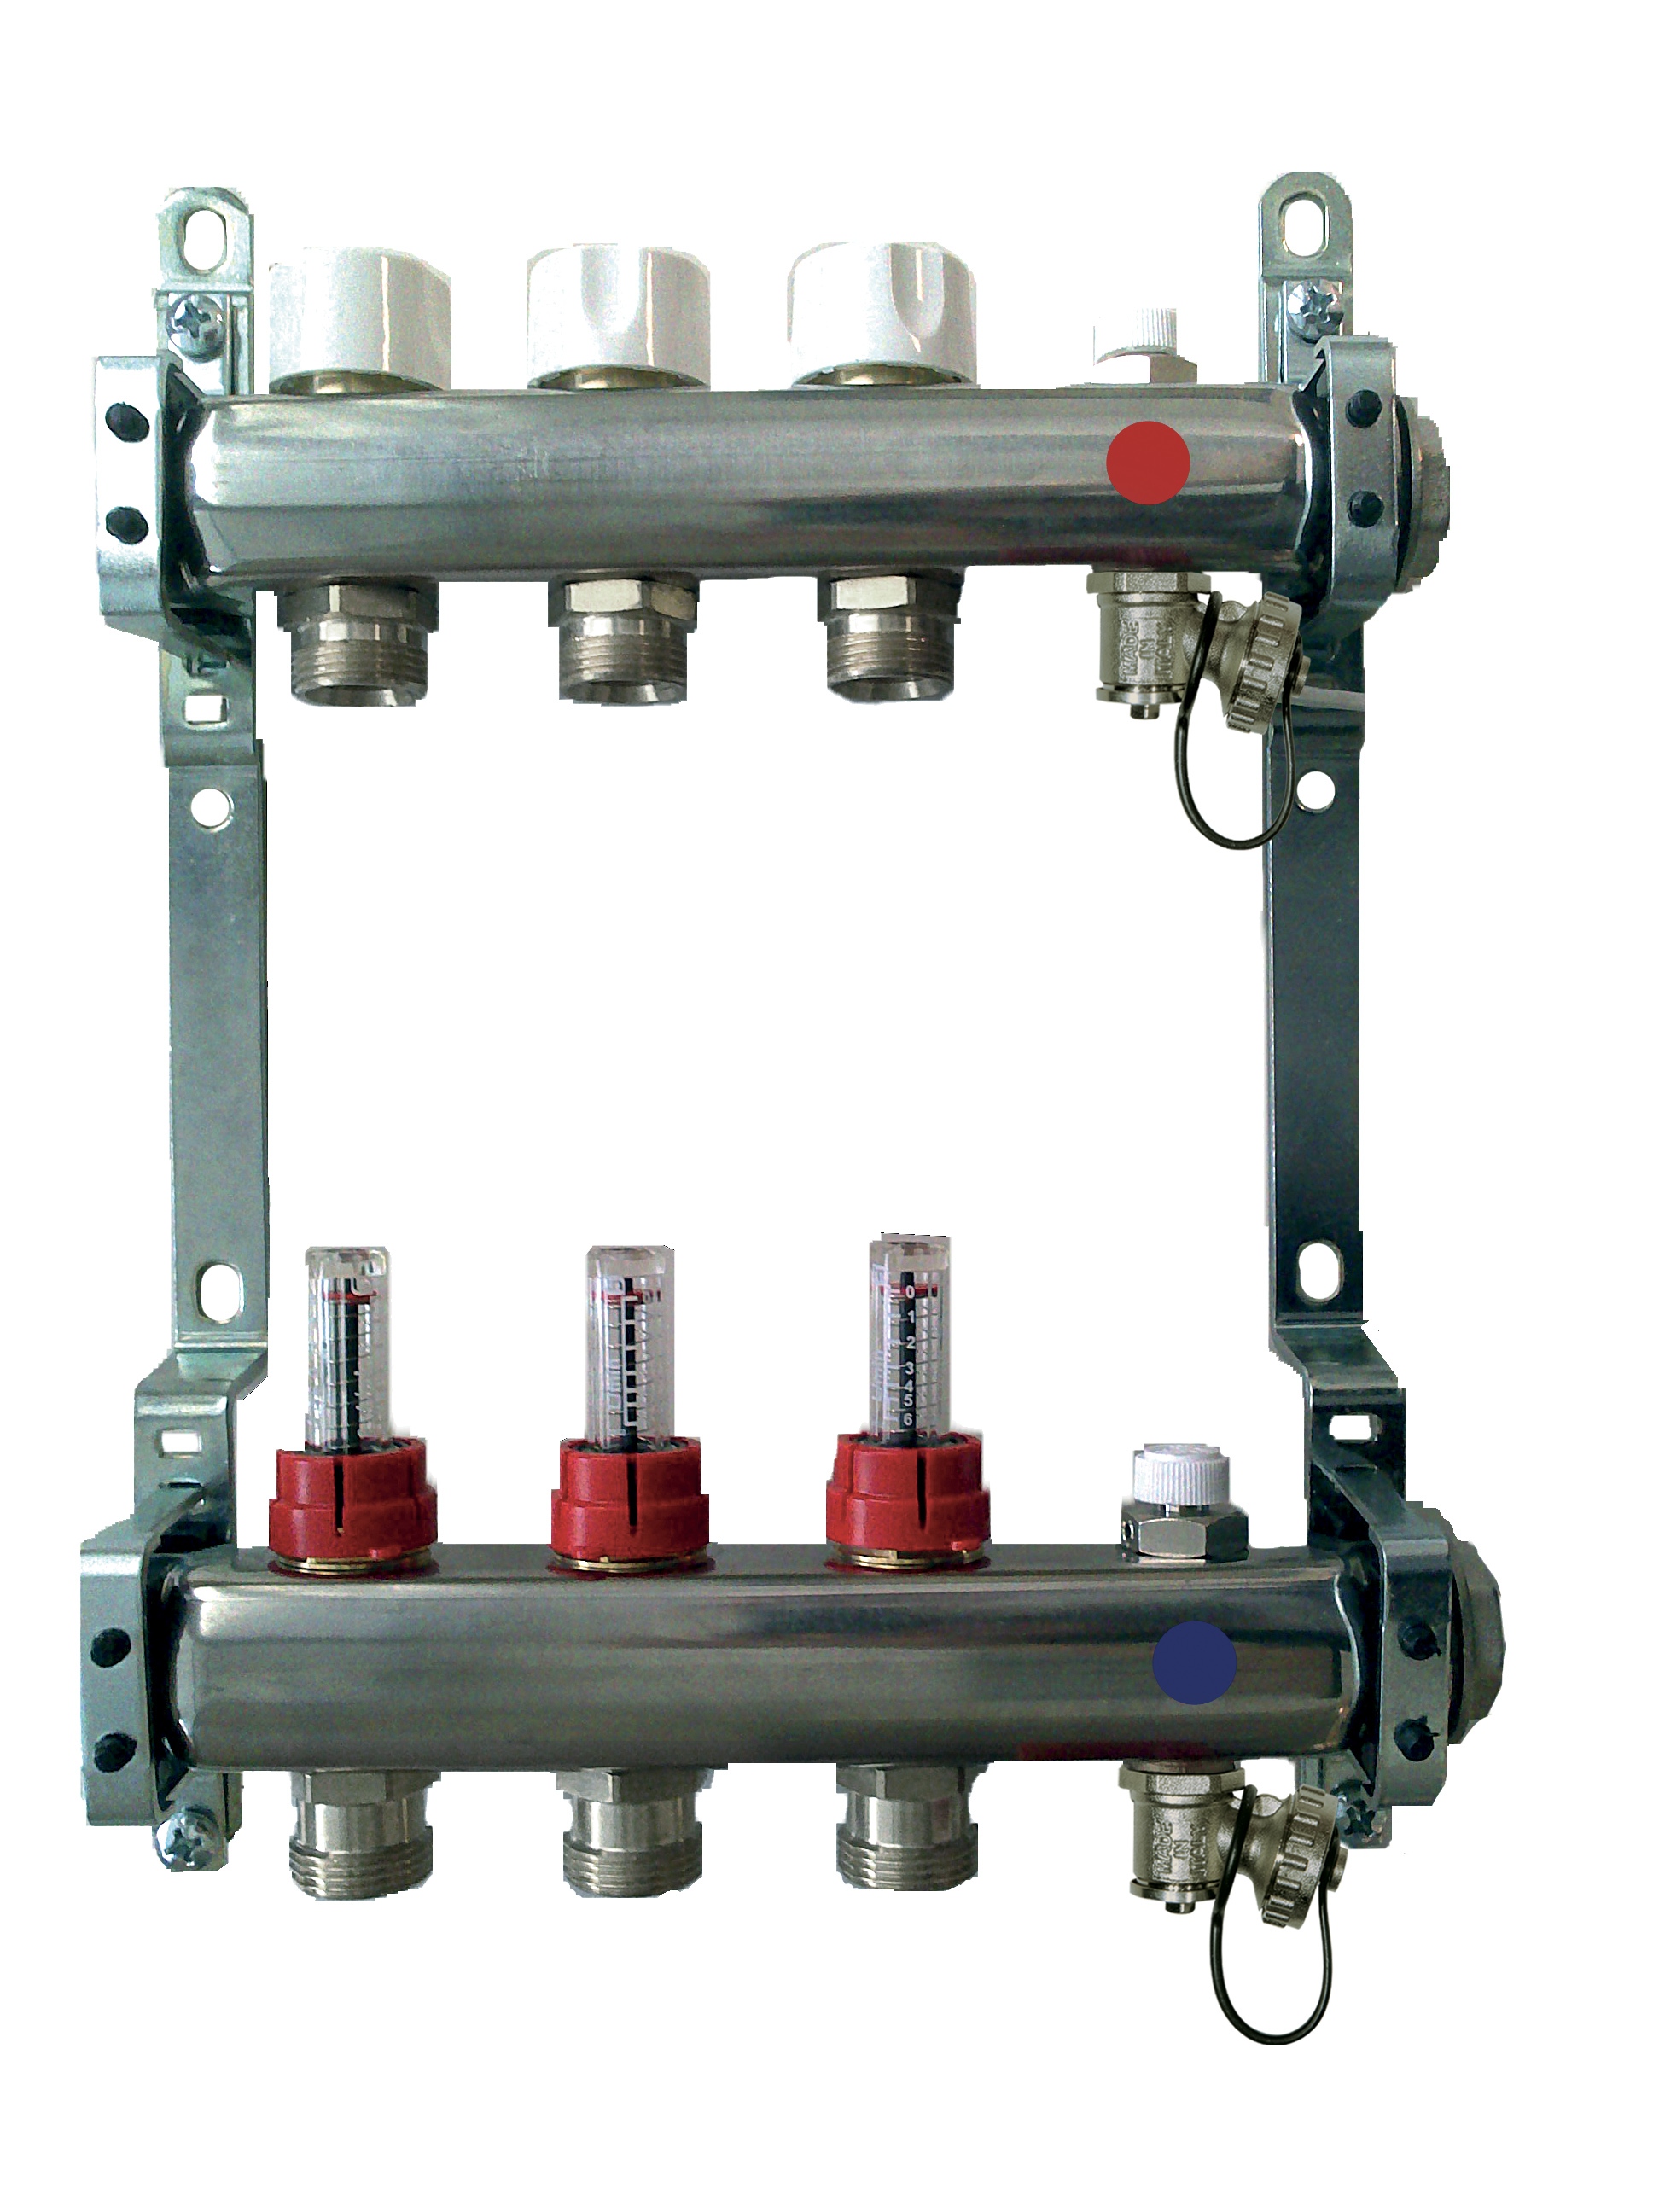 FF manifolds therm. valves and flowmeters, man. Discharge %>